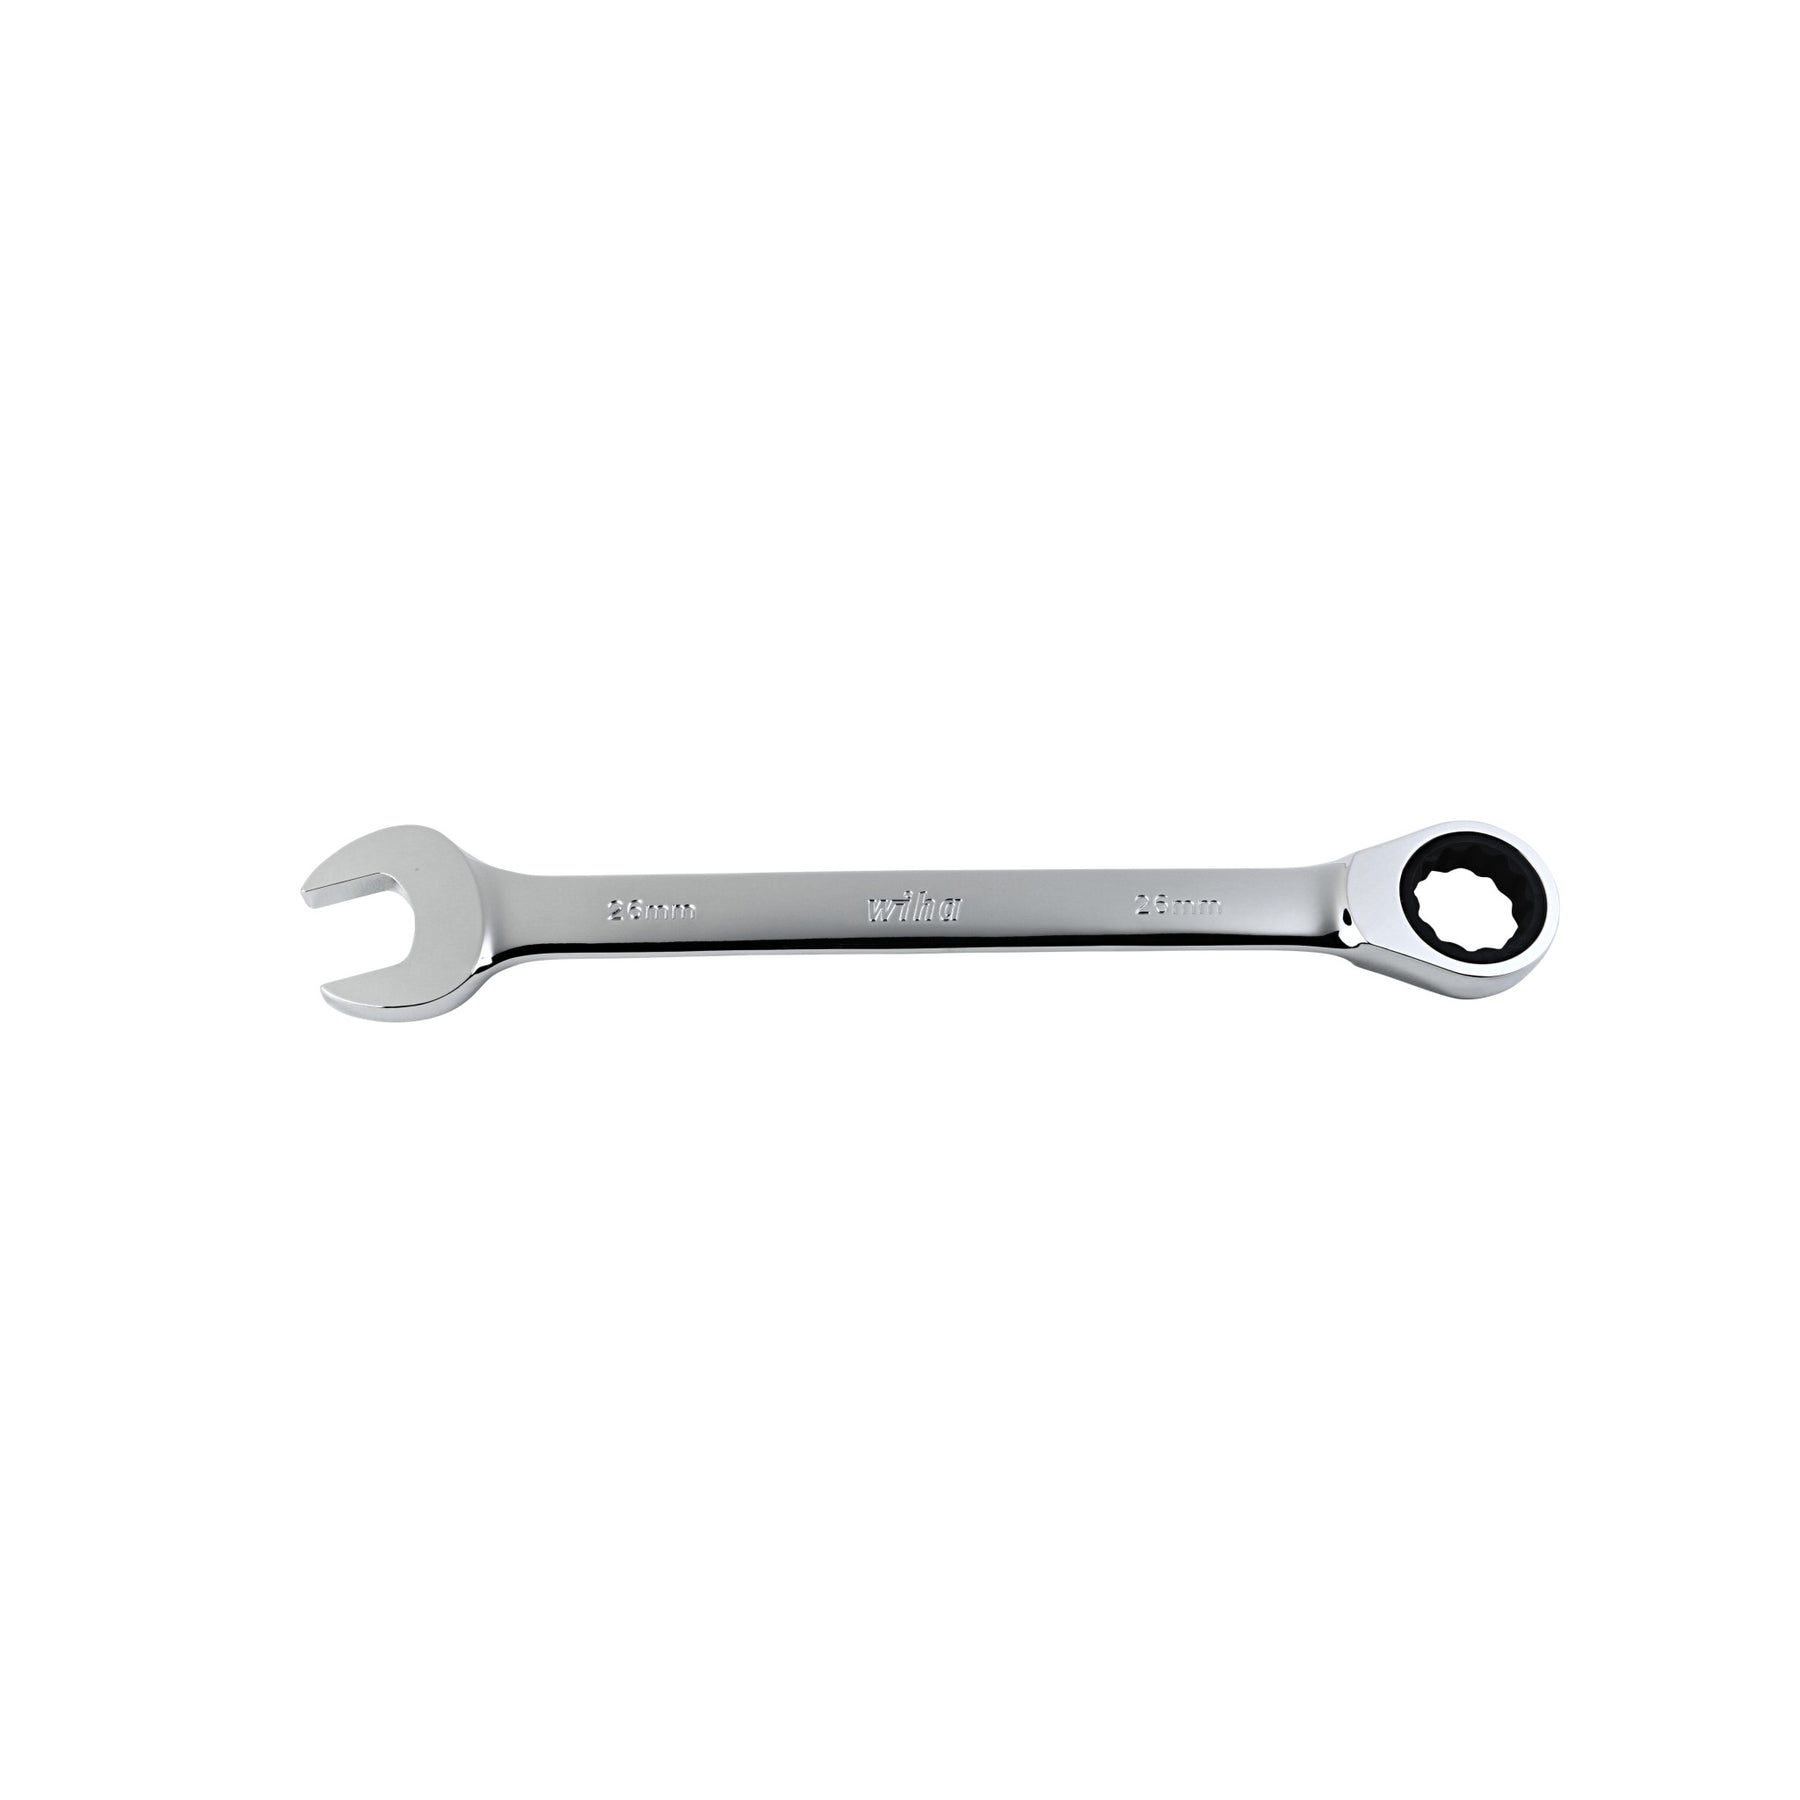 Simply buy Open ended spanner / ratchet ring spanner set, in a tool wallet  with swivel head | Hoffmann Group